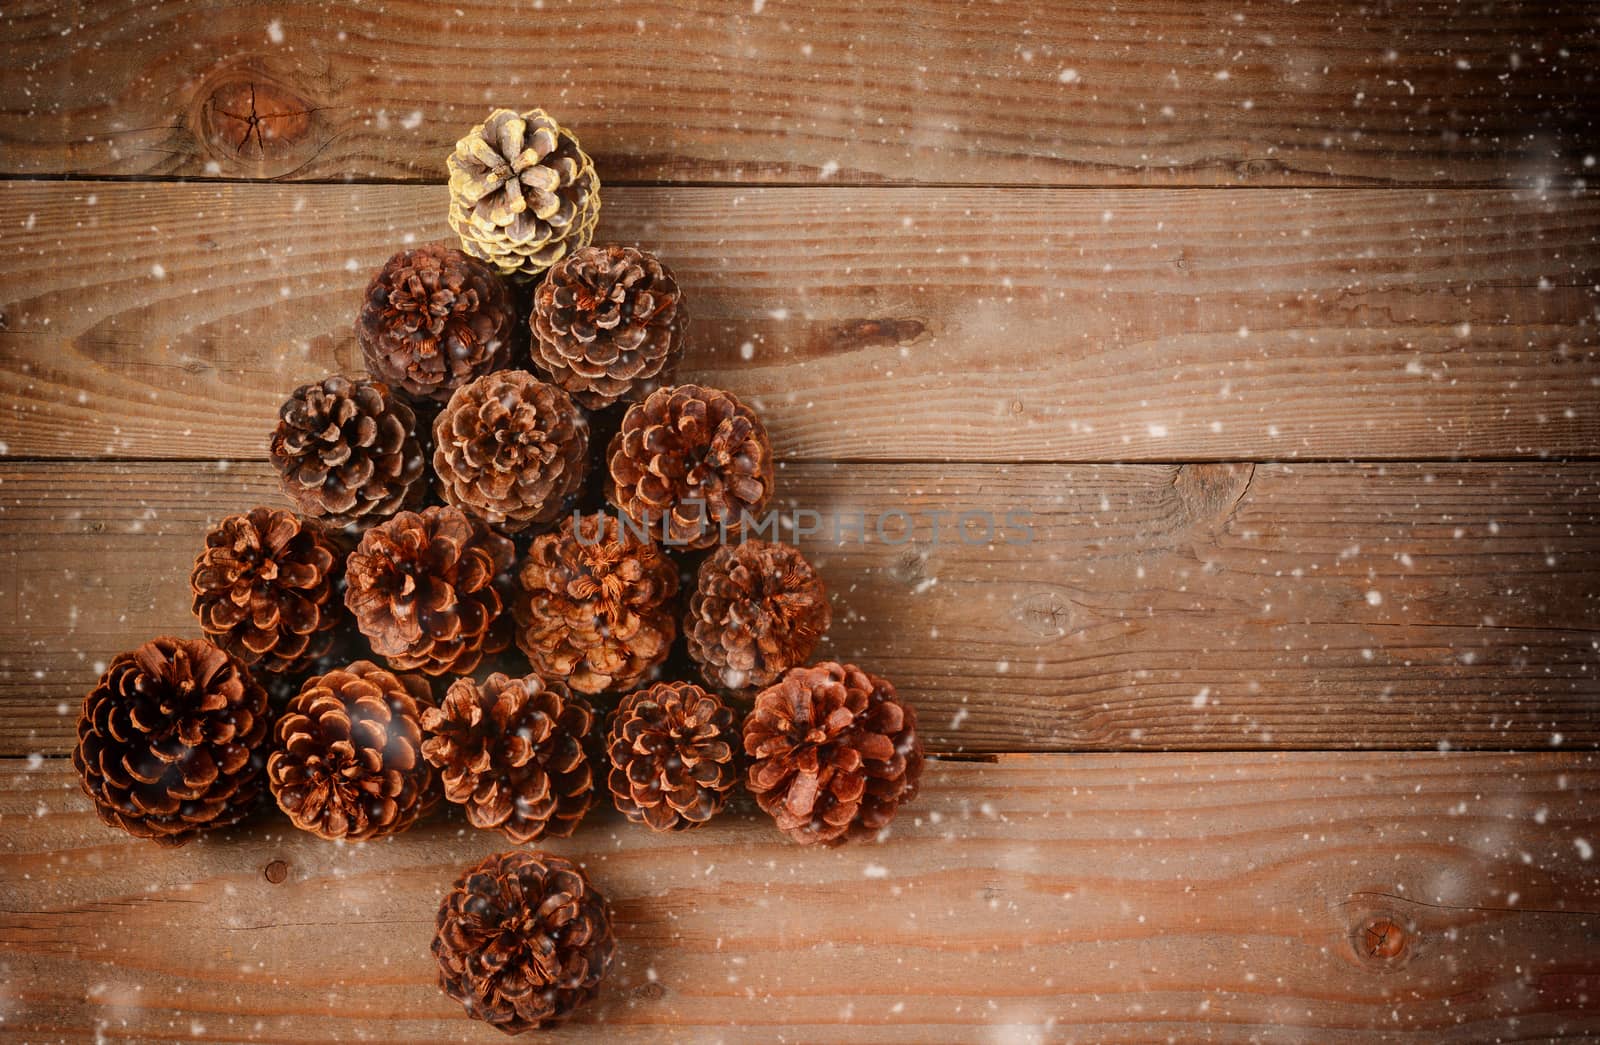 A group of pine cones arranged in a Christmas Tree shape on a rustic wood floor with snow flakes effect. Horizontal format with an instagram retro look and copy space.